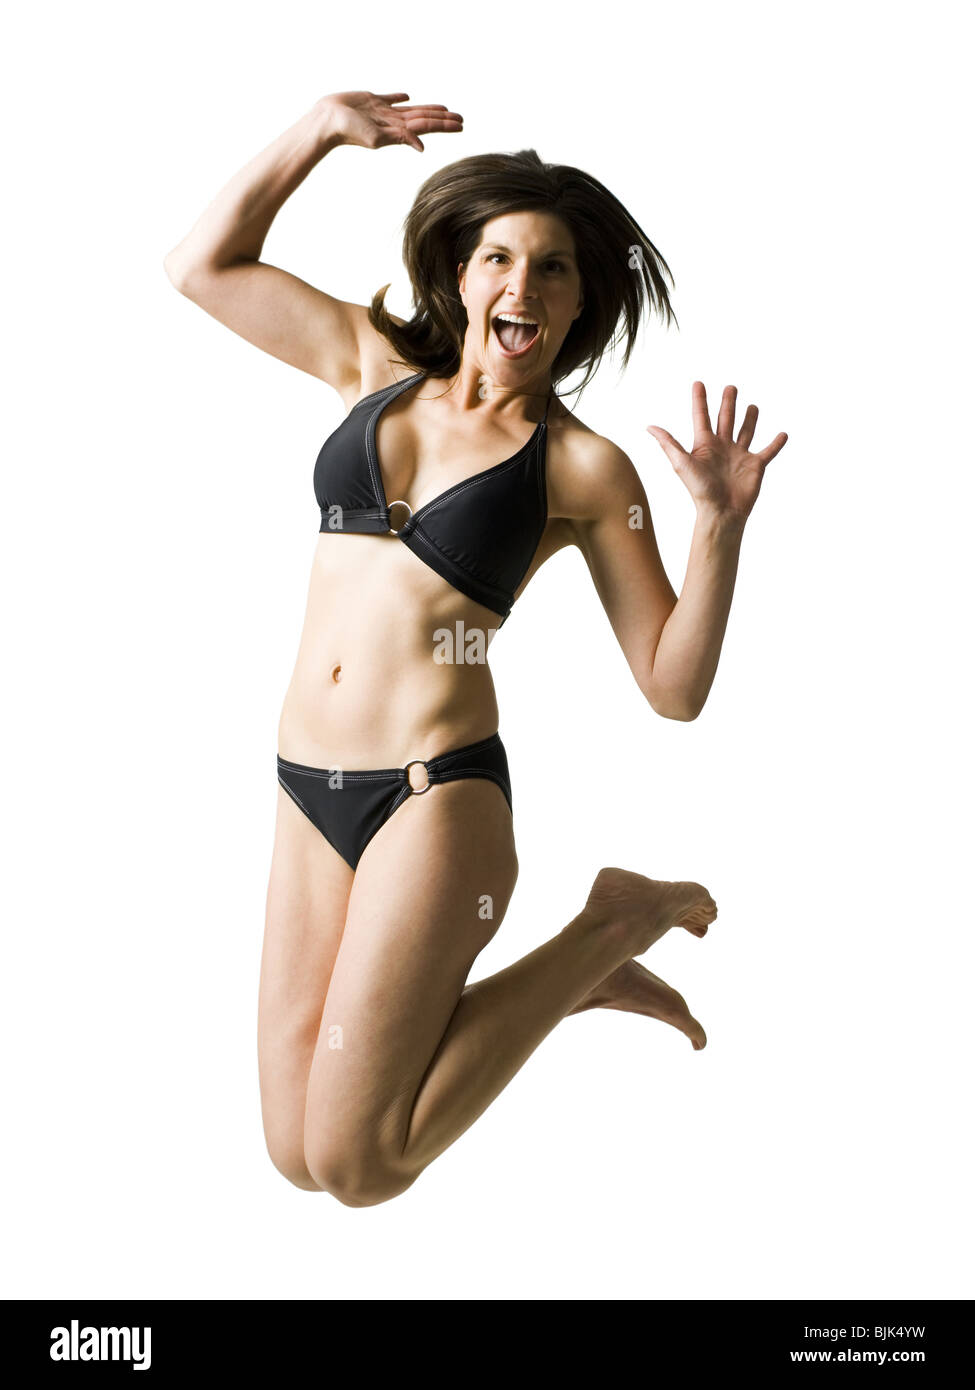 Woman in bikini jumping with hands up smiling Stock Photo